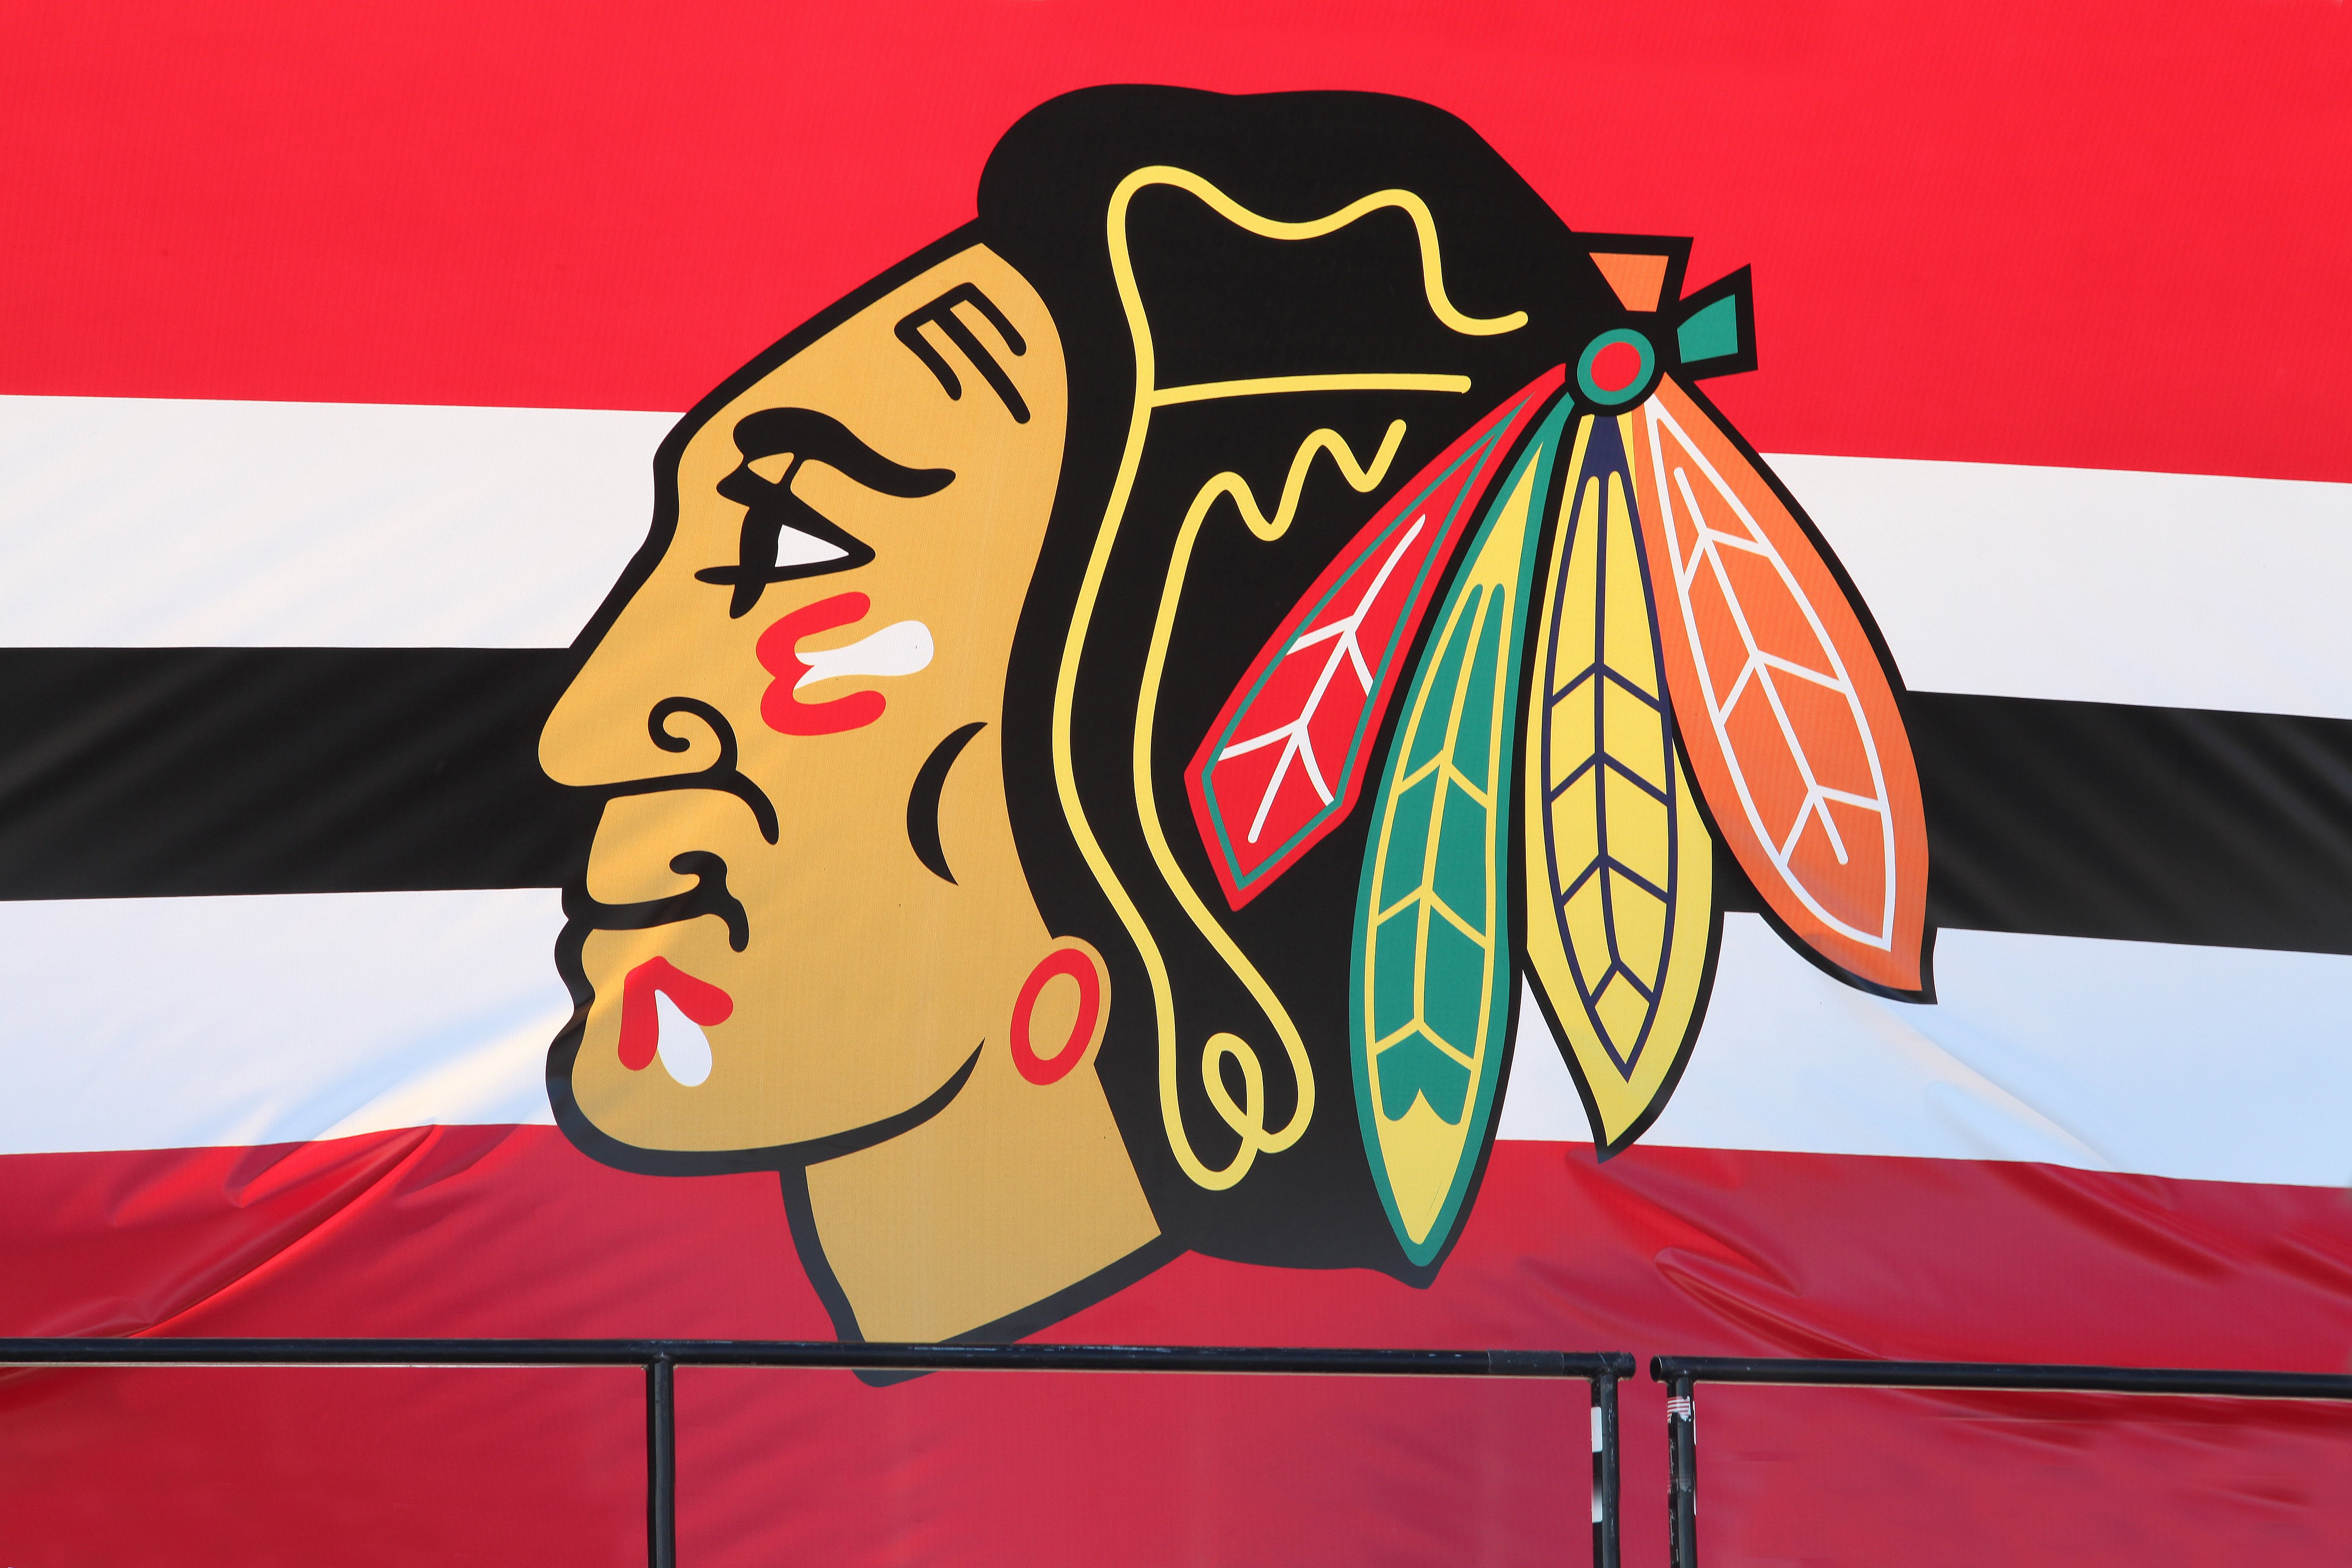 In Wake of Indians' Decision, Blackhawks Stay with Team Name